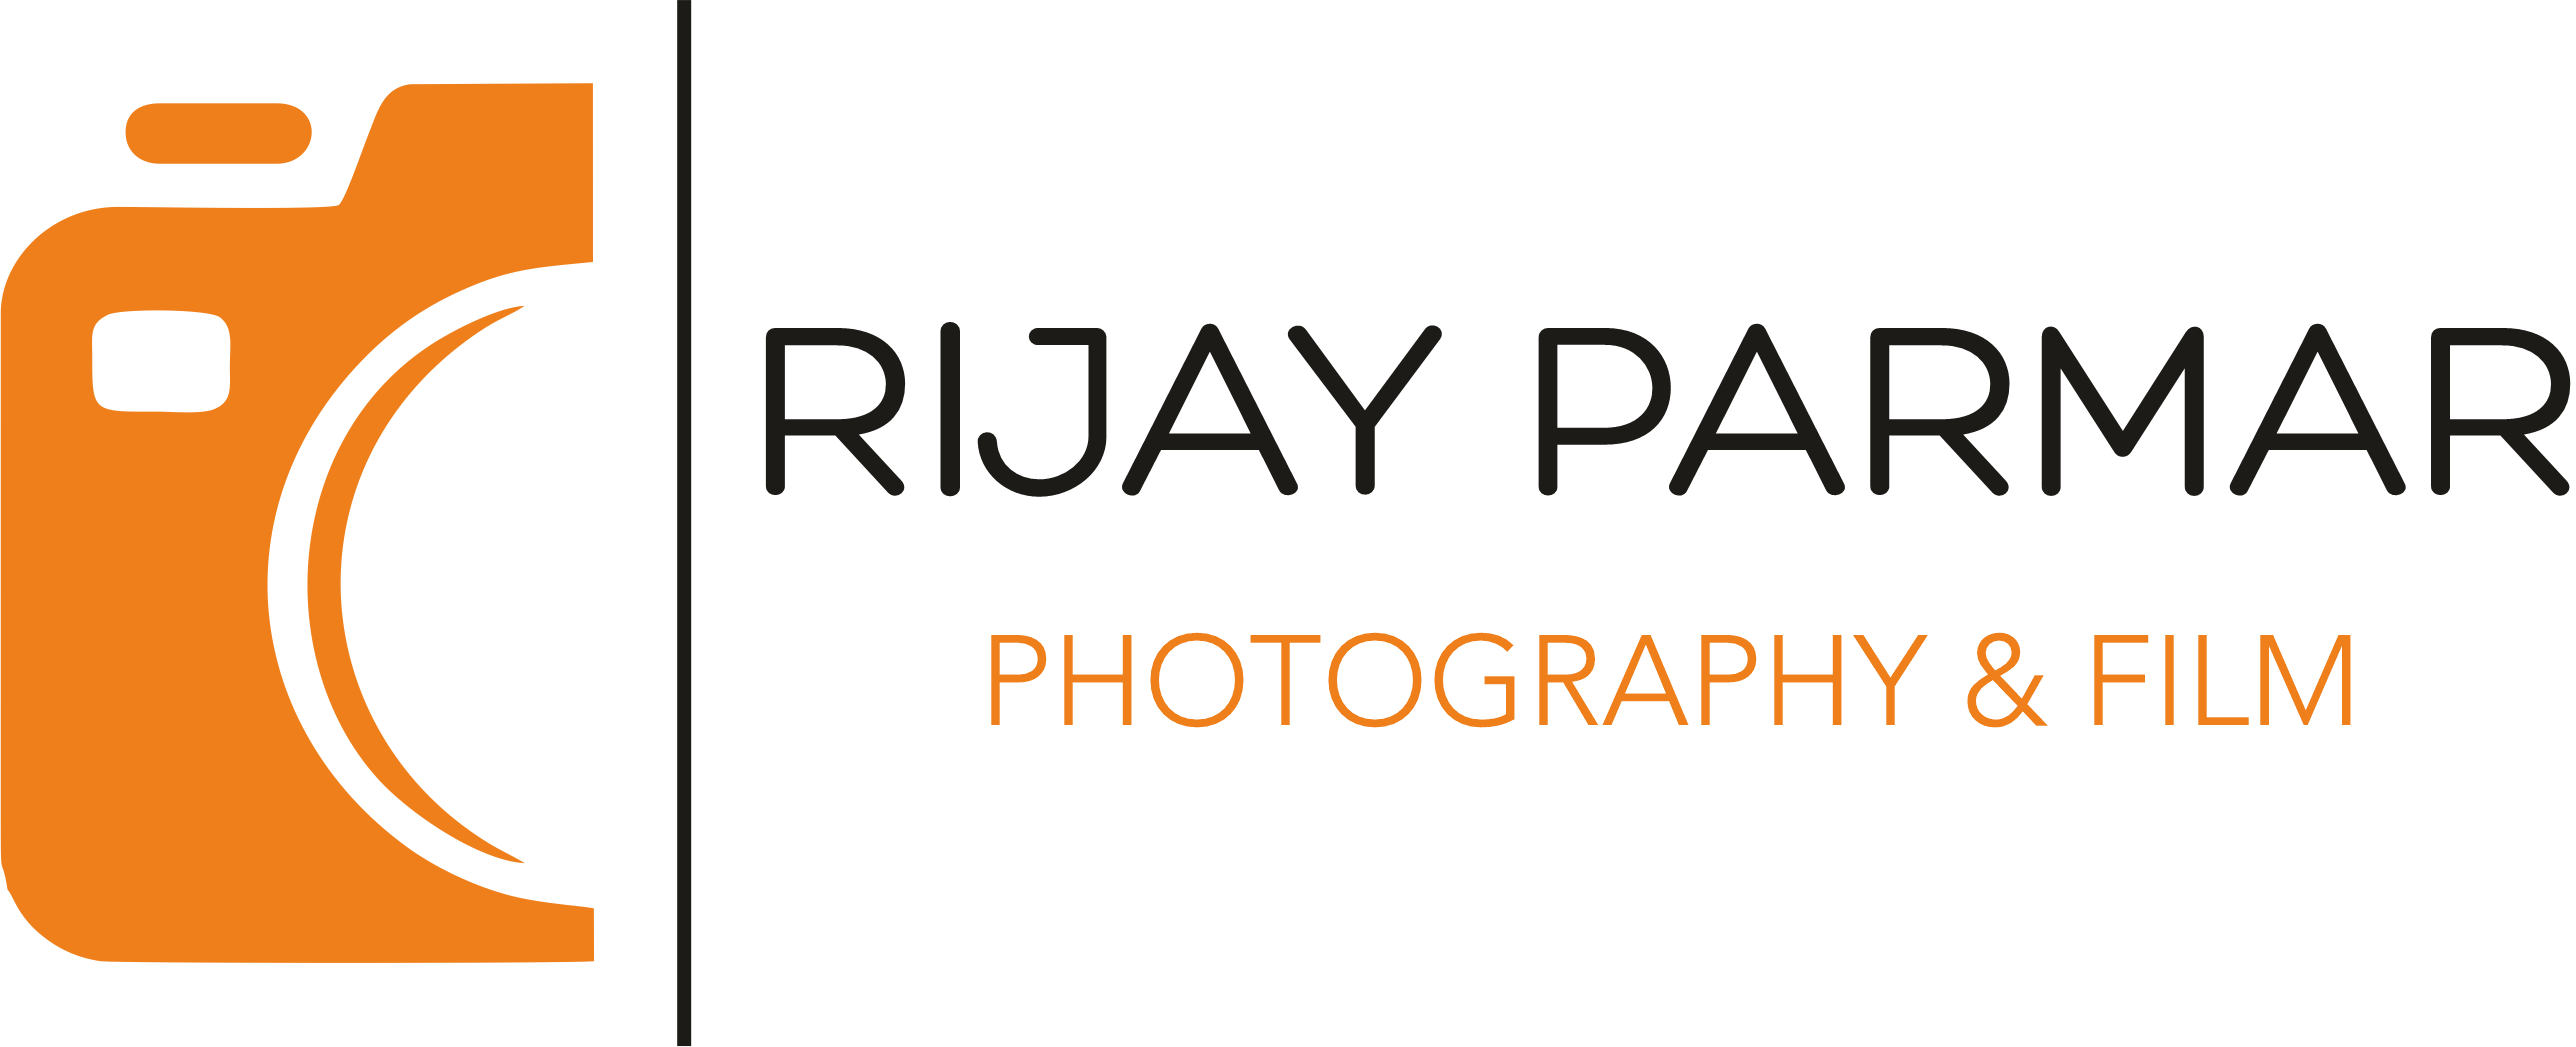 Welcome to Rijay Parmar Wedding Photography